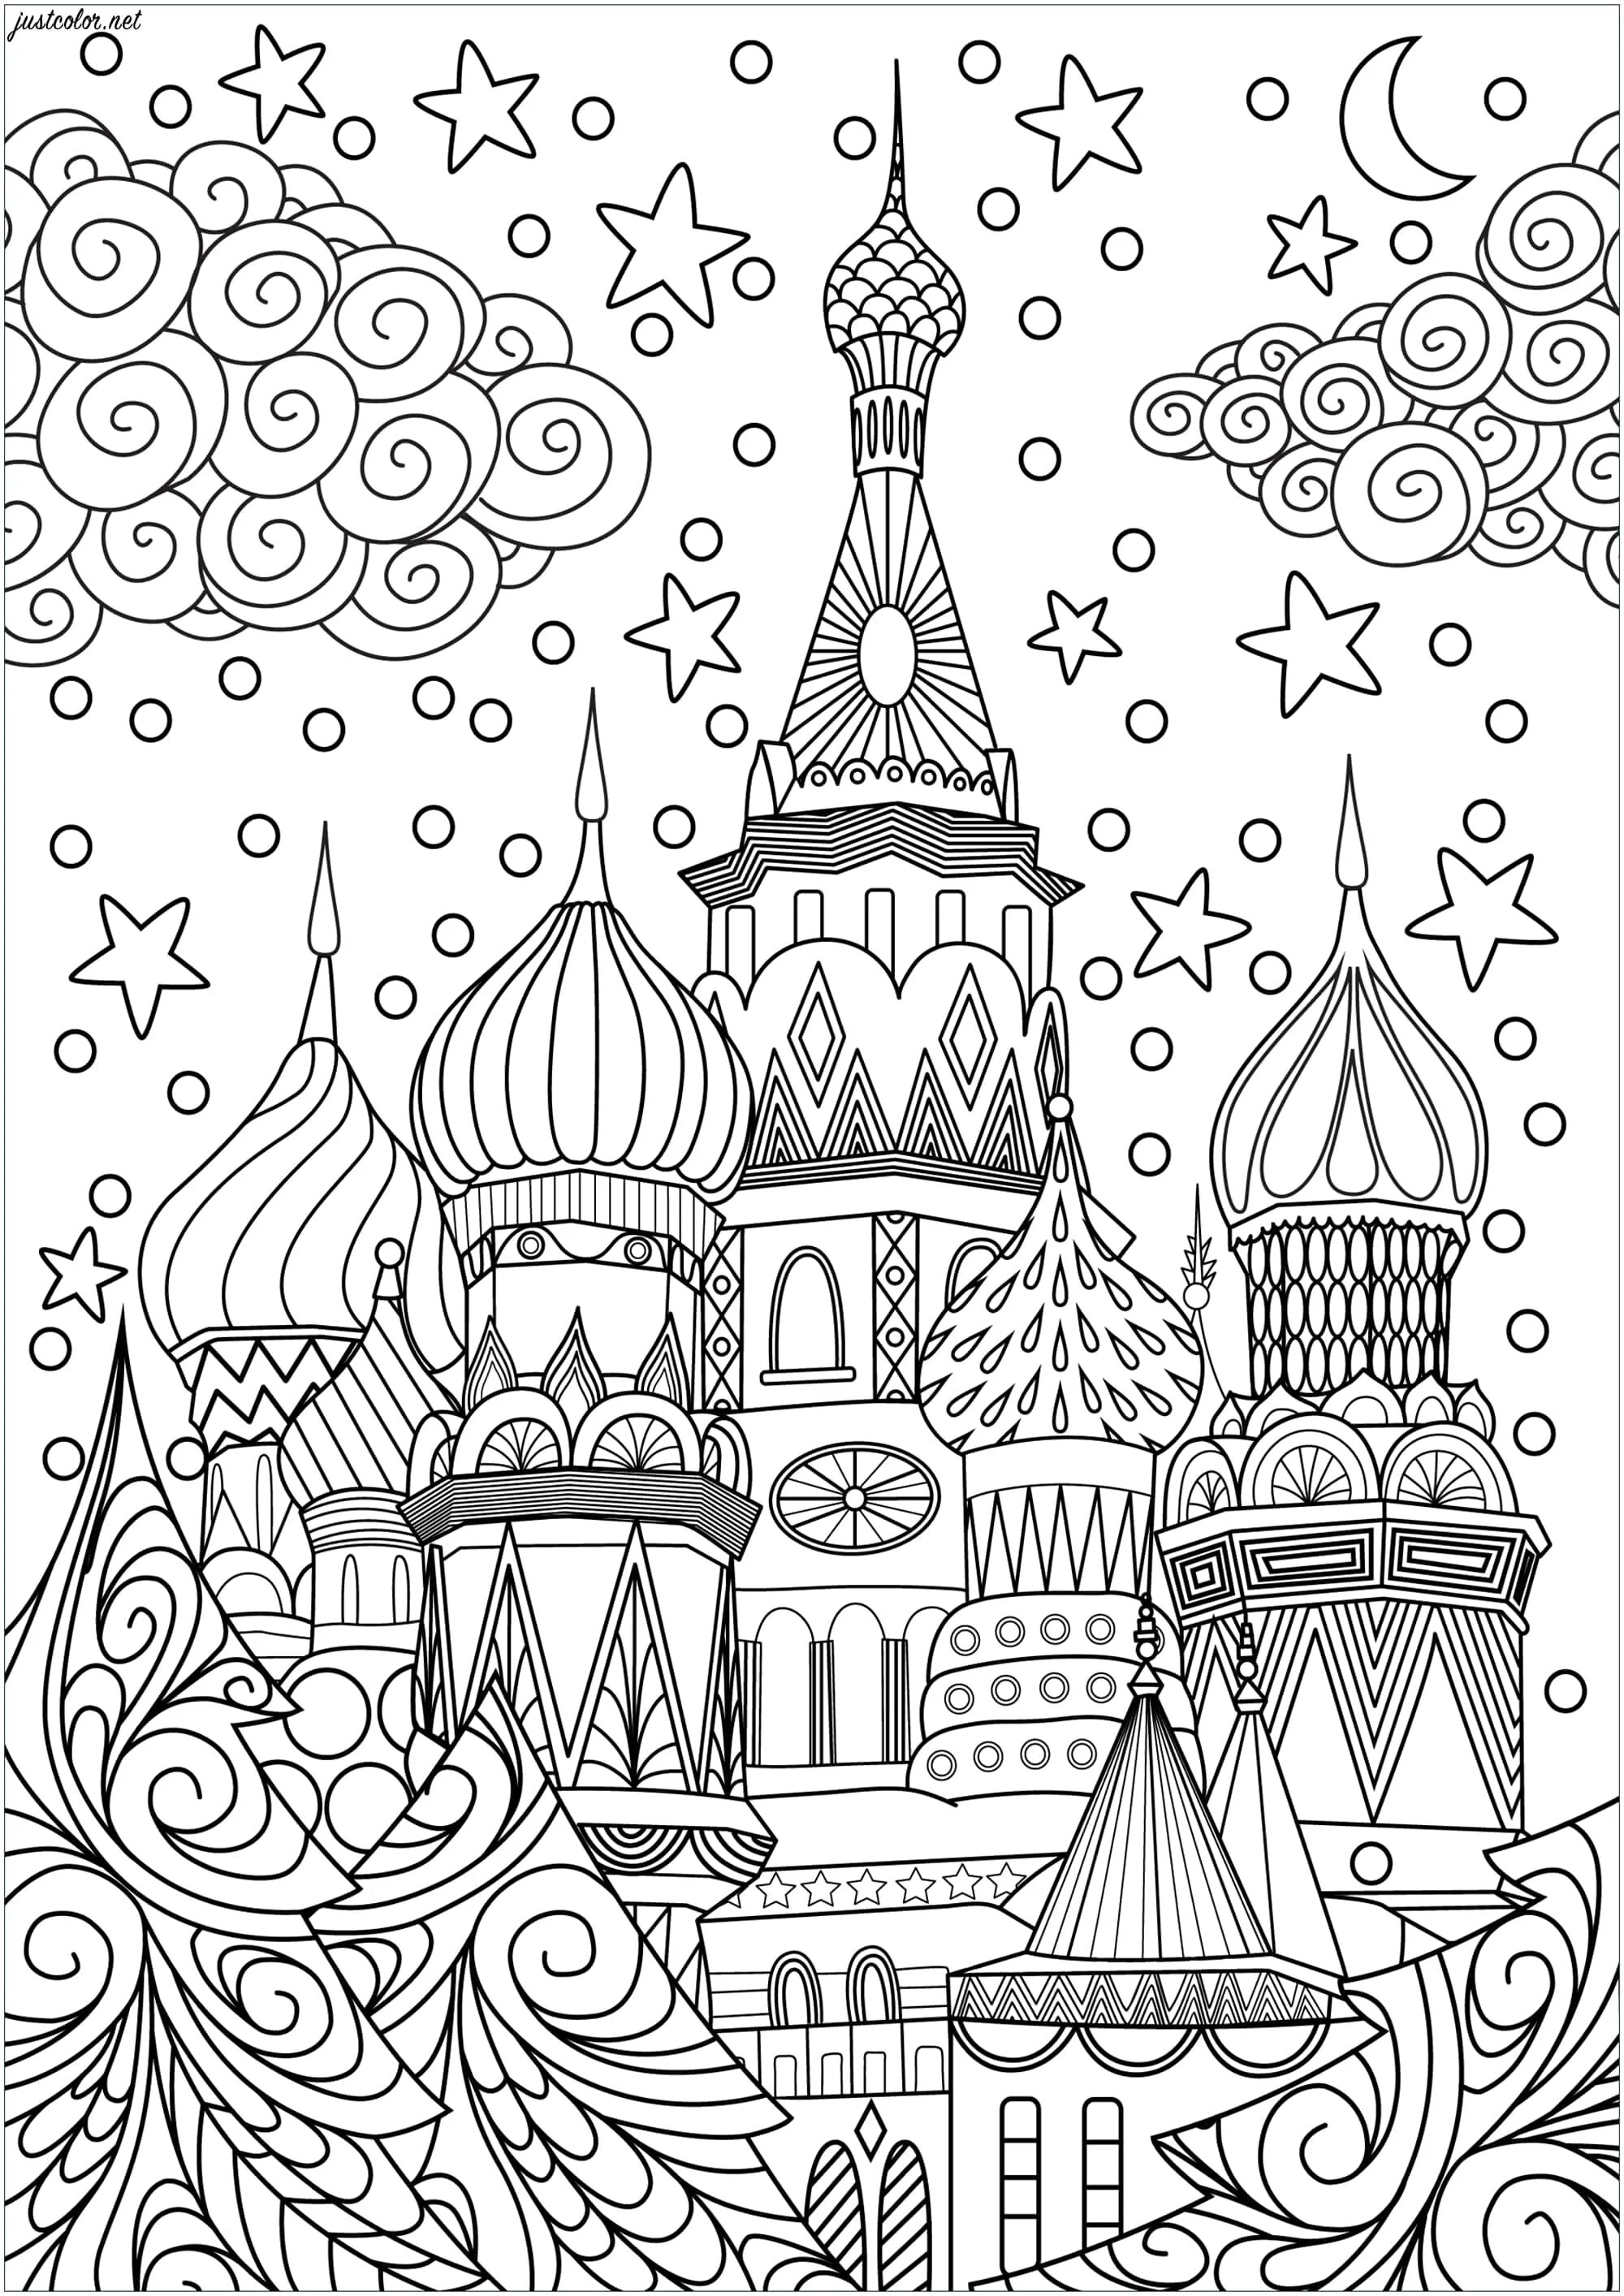 St. Basil's Cathedral for children #13